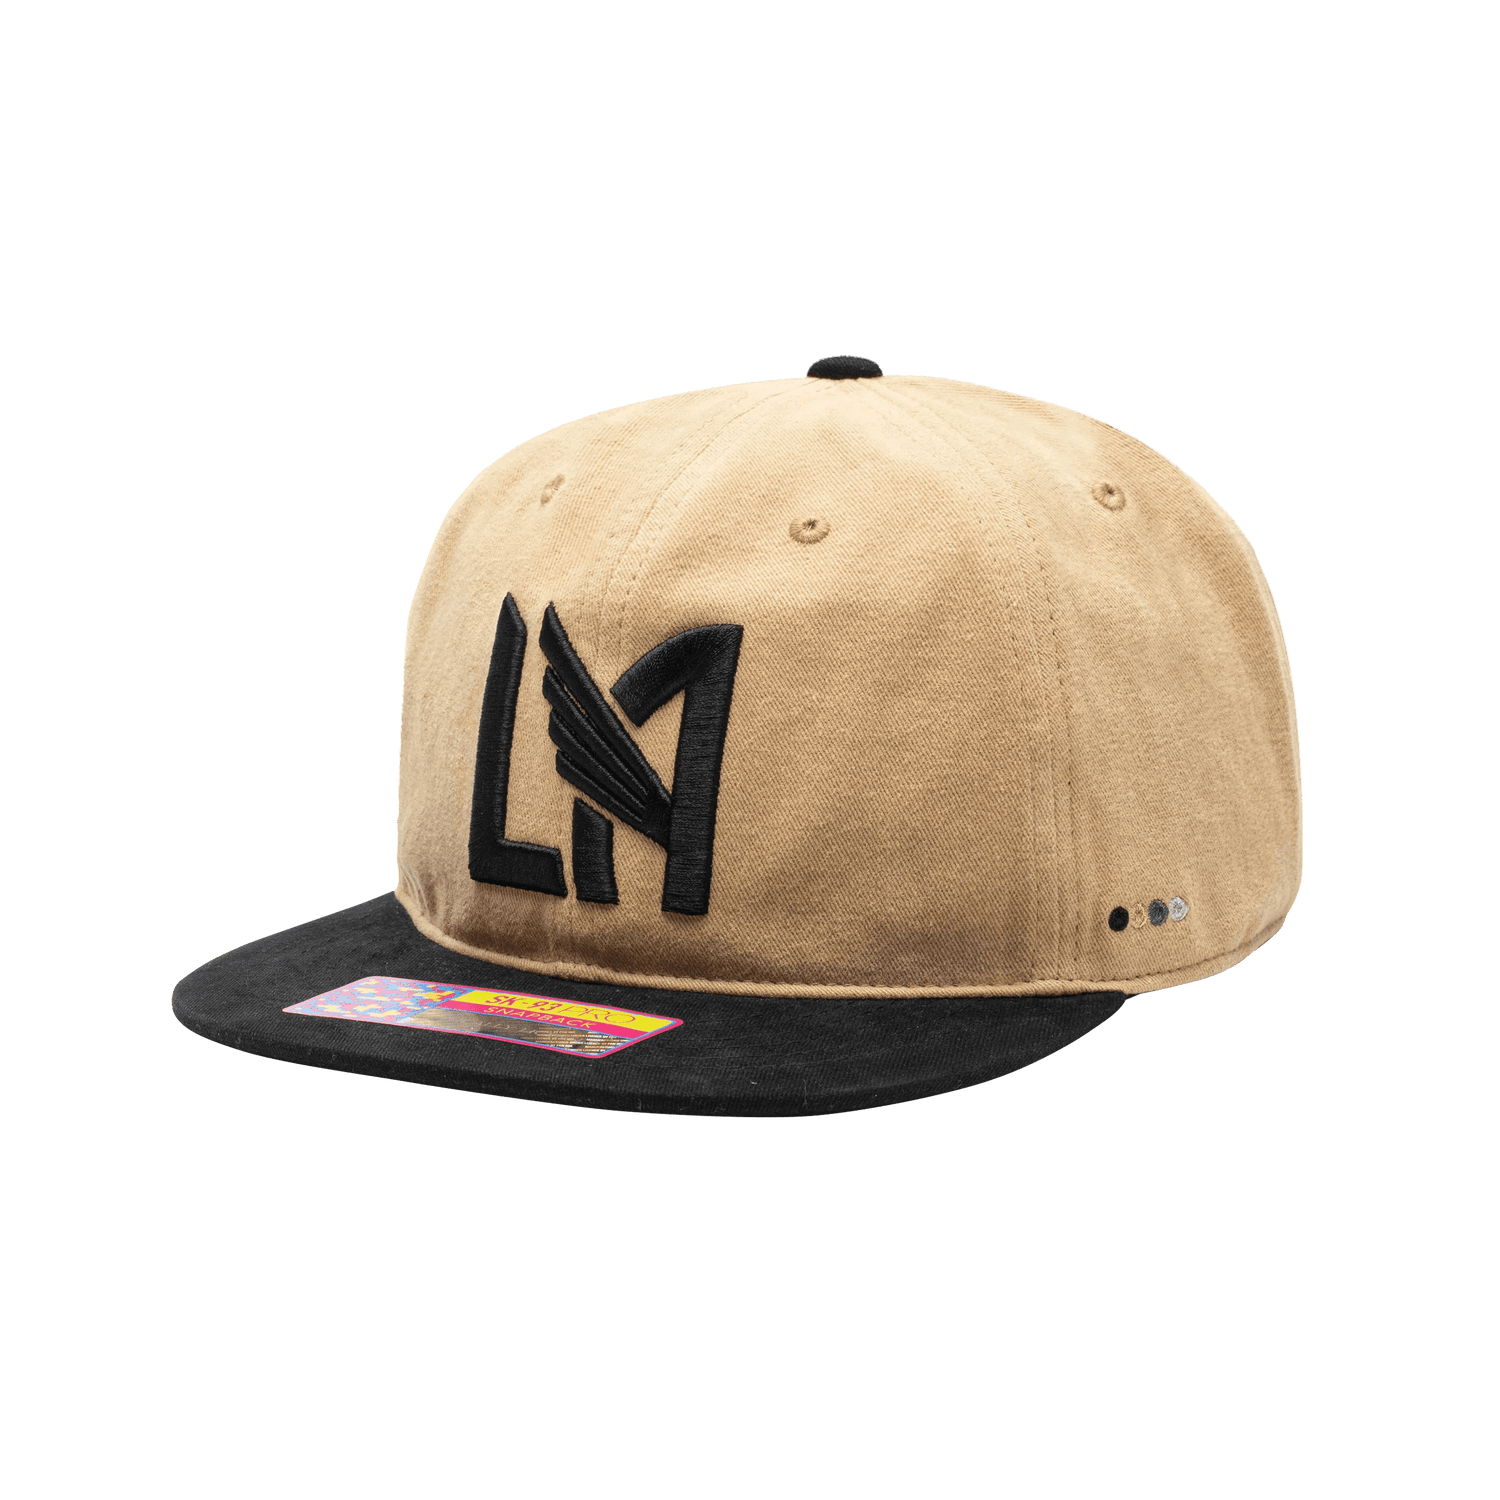 FI Collection LAFC Swingman Snapback Hat (Lateral - Side 1)